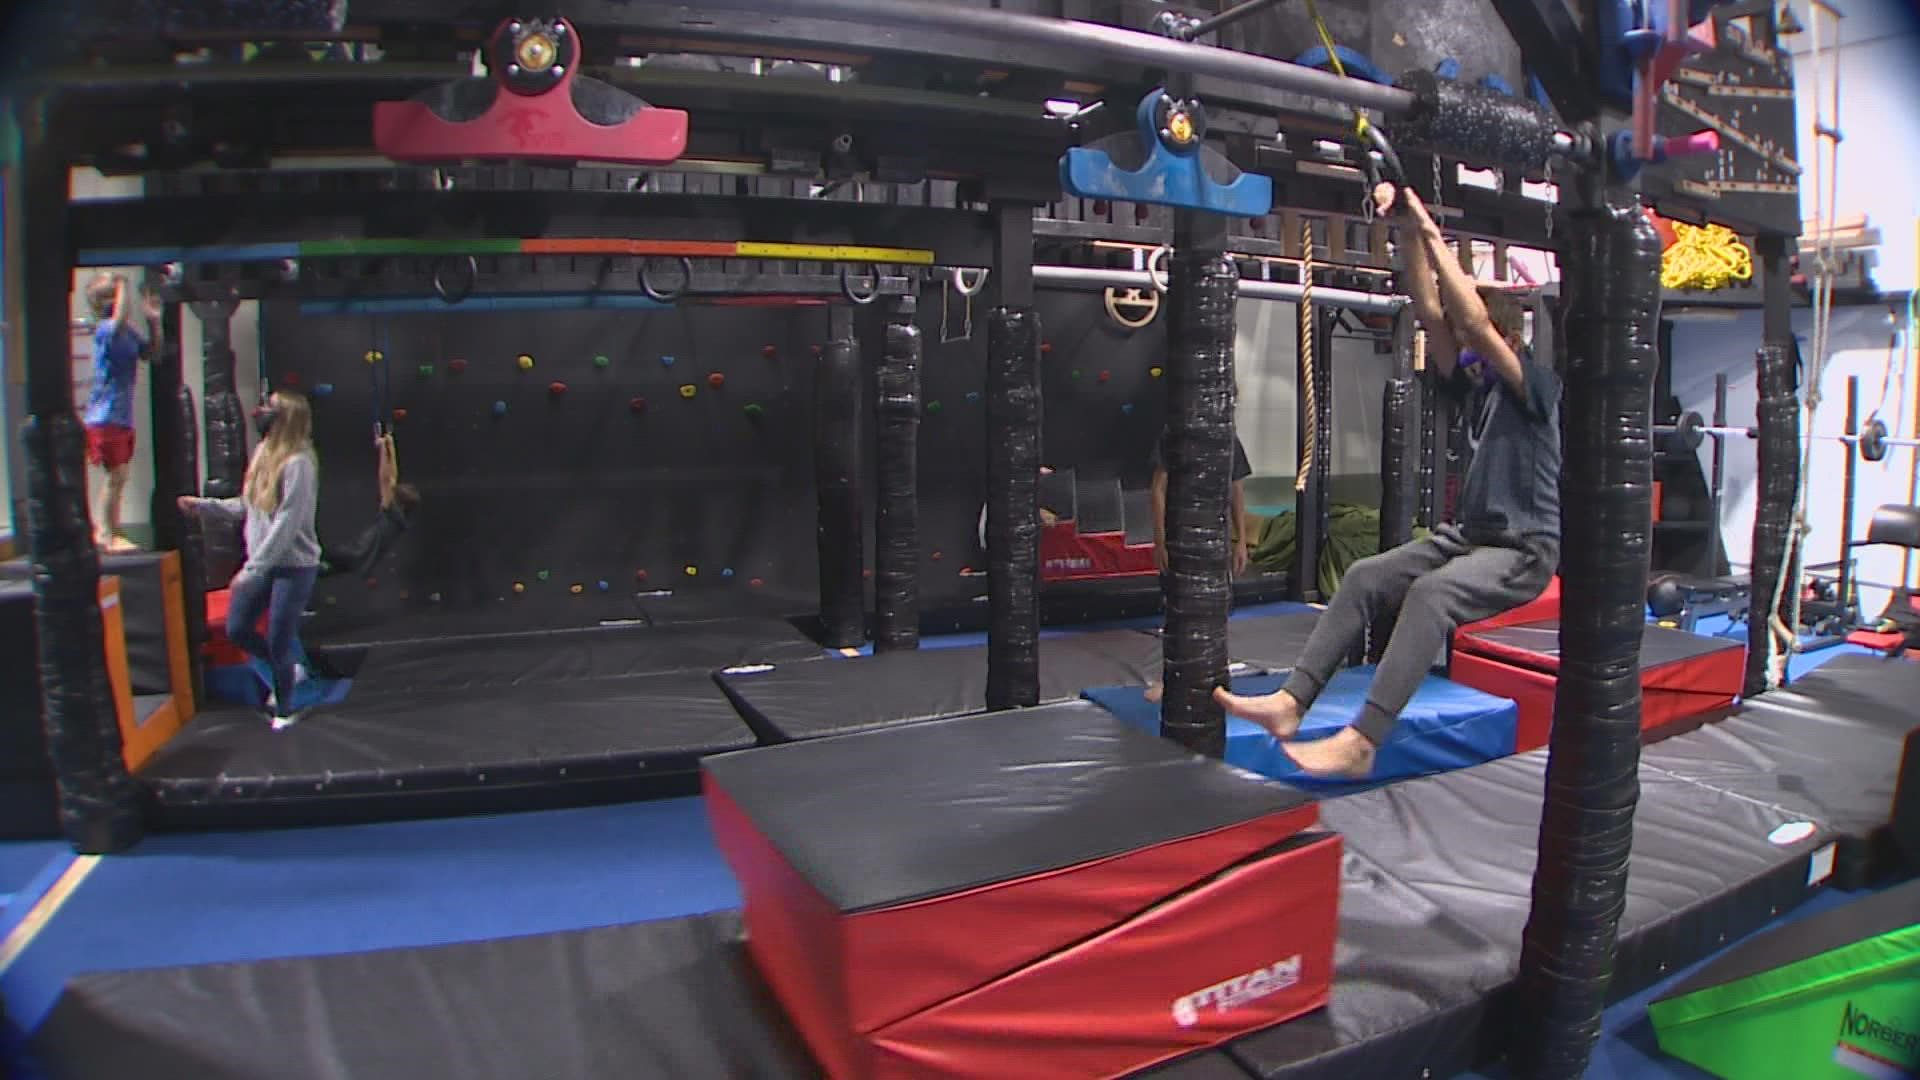 The owner of Sumner Ninja in Auburn says the requirement will make gym-goers safer, while some customers say they'll be taking their business elsewhere.